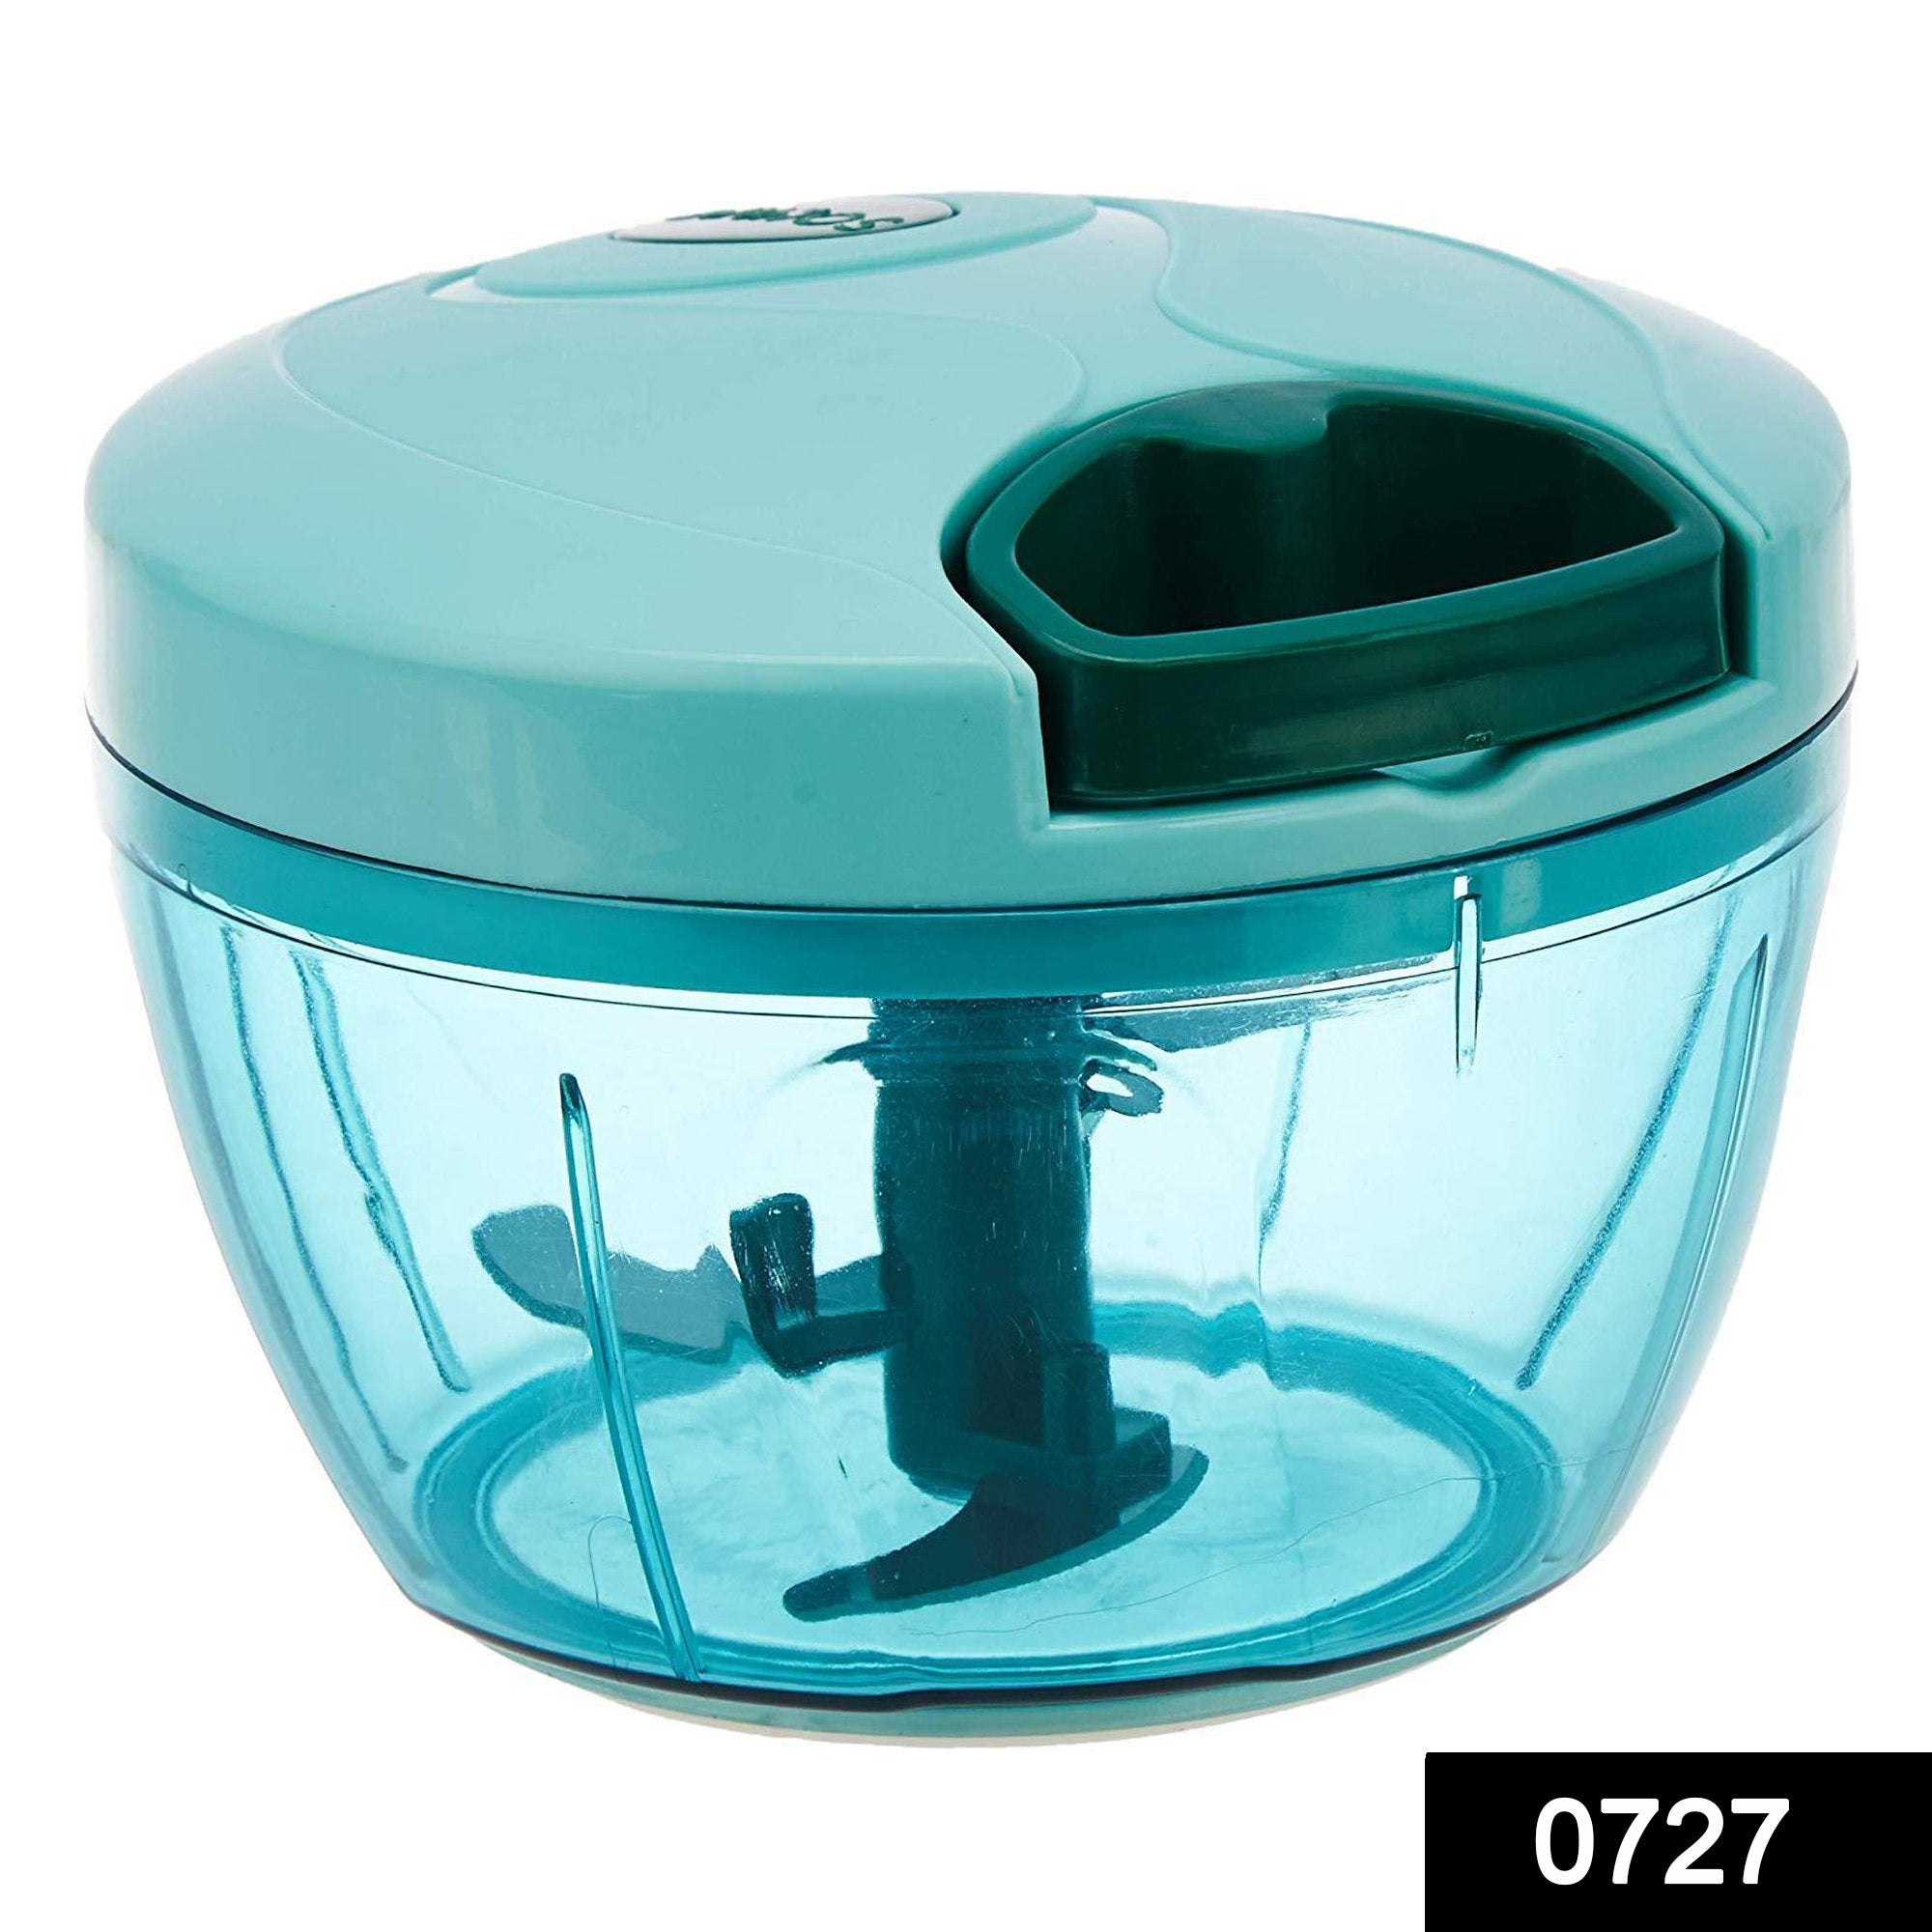 0727 Manual Handy and Compact Vegetable Chopper/Blender - SkyShopy